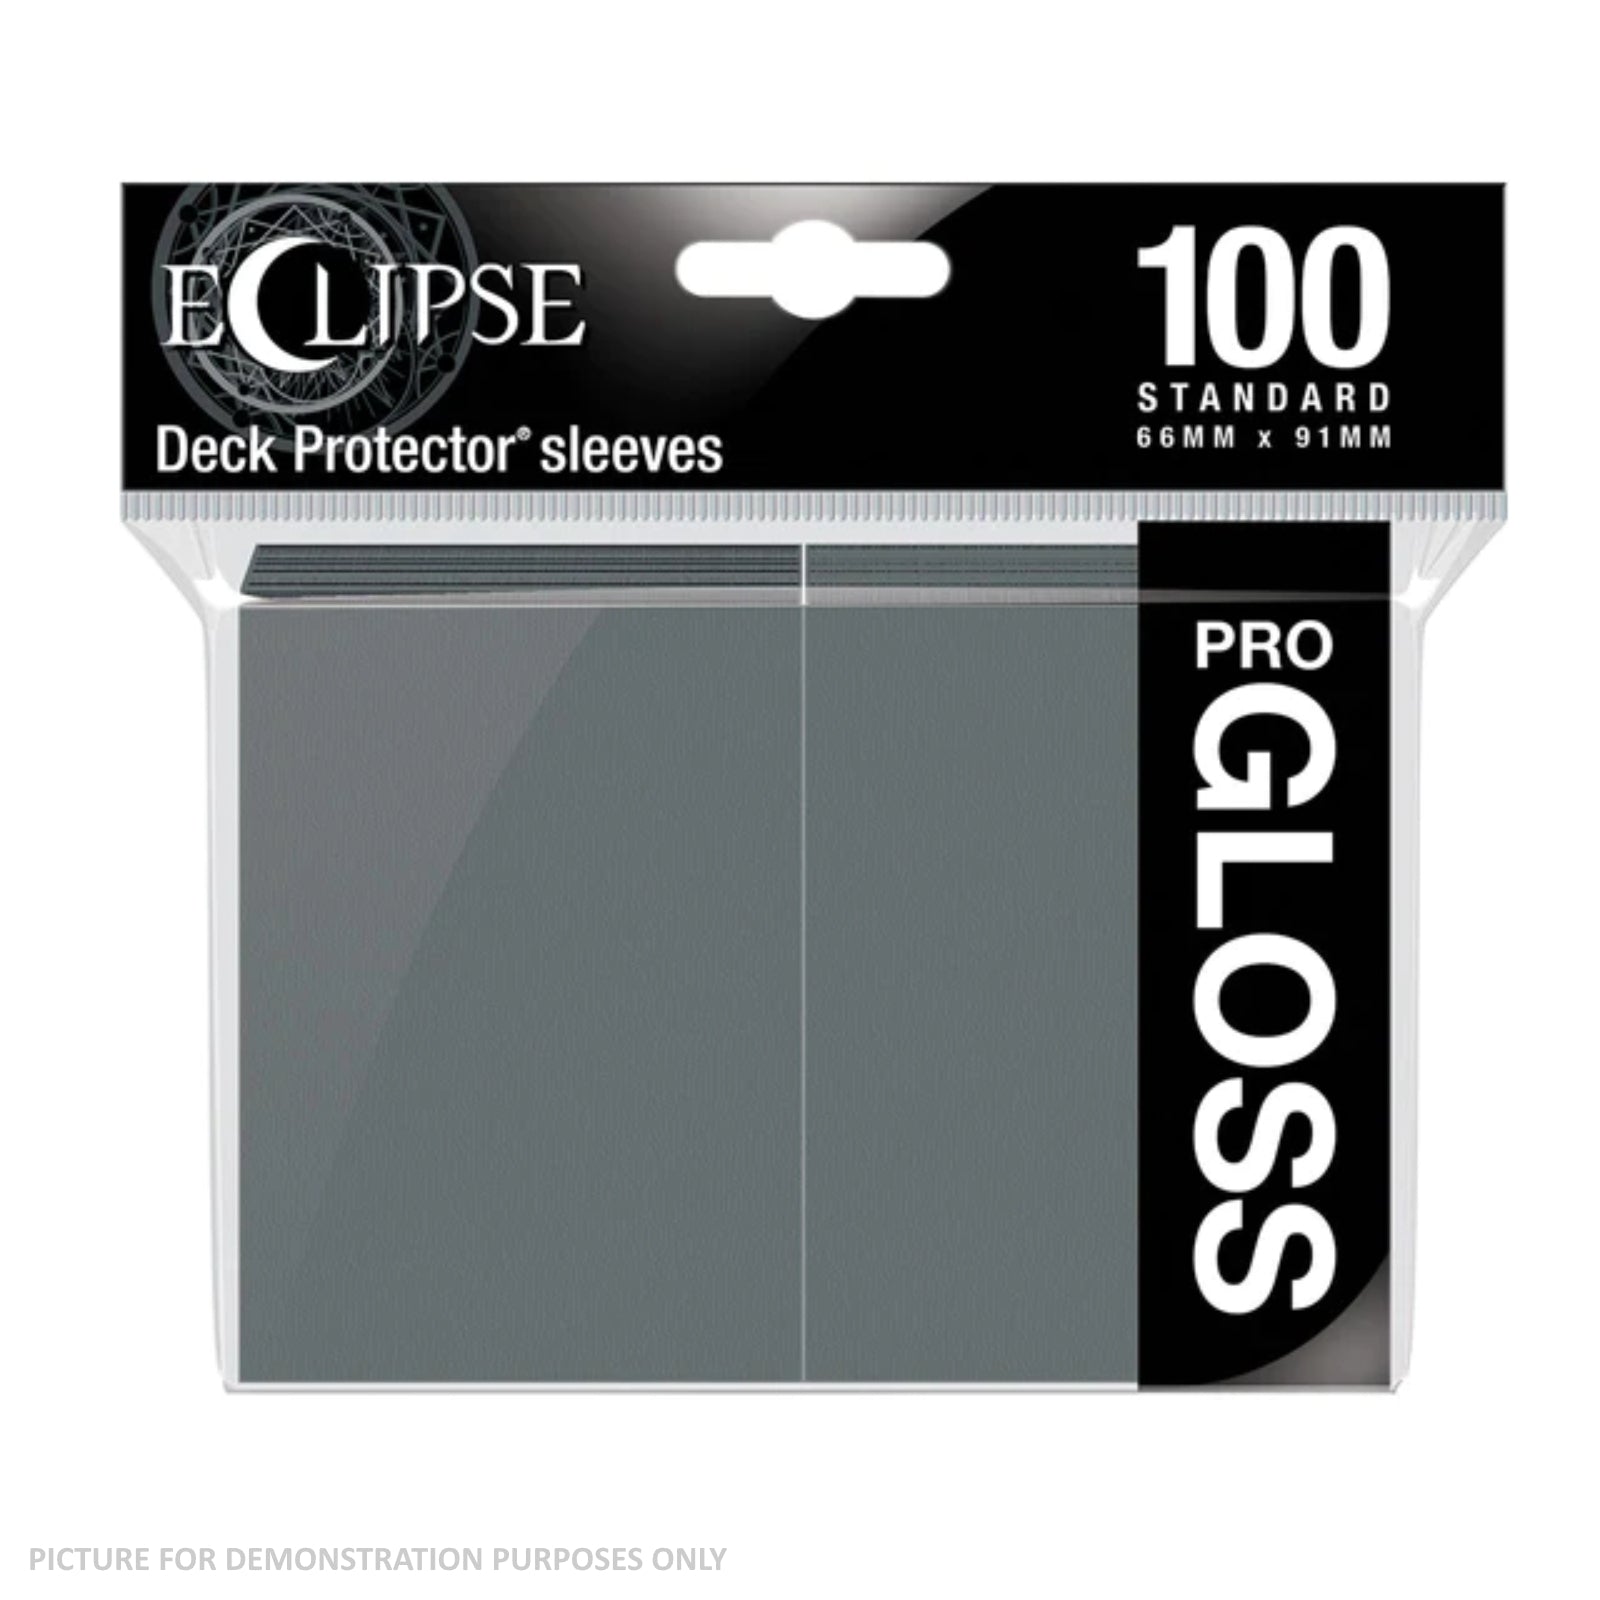 Ultra Pro Eclipse Gloss Standard Deck Protector Sleeves 100ct - Grey